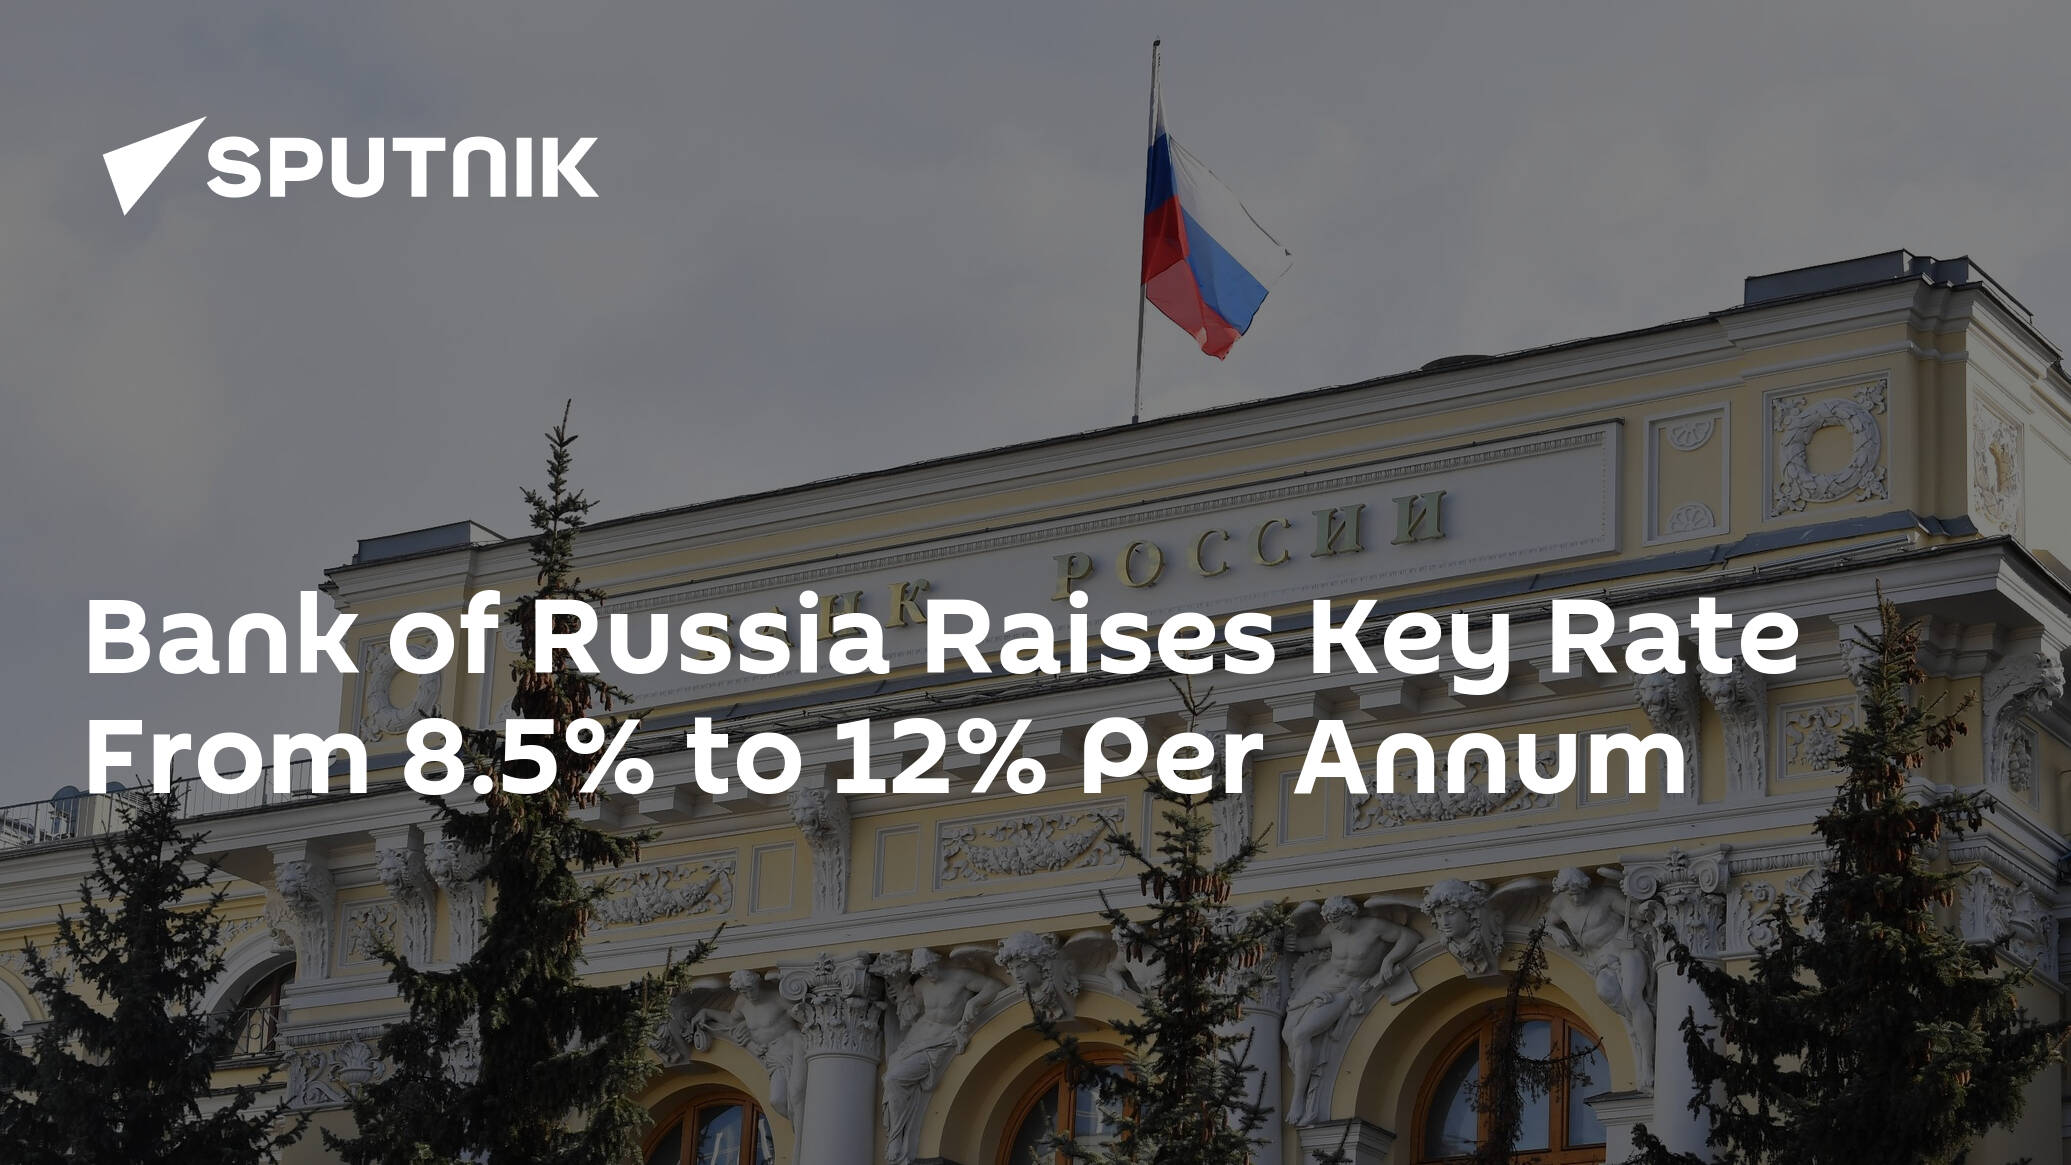 Bank of Russia Raises Key Rate From 8.5% to 12% Per Annum